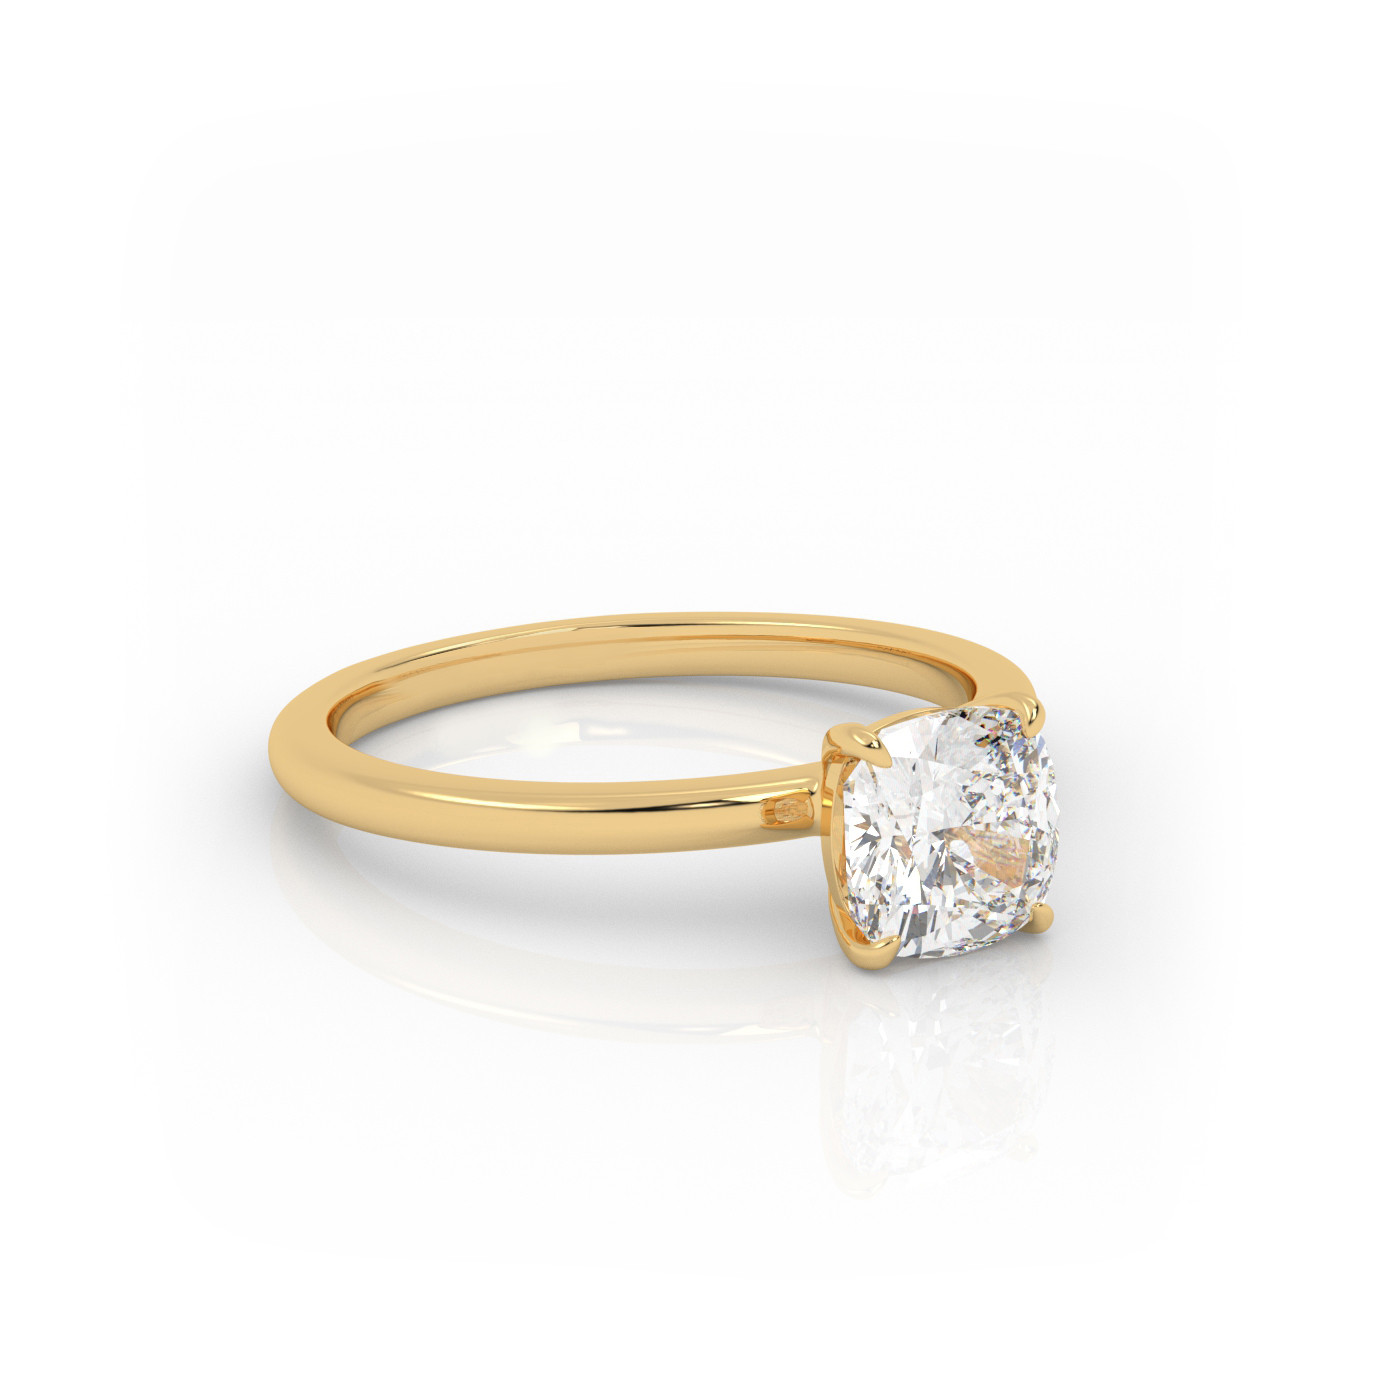 18K YELLOW GOLD Cushion Cut Classic Solitaire Engagement Ring